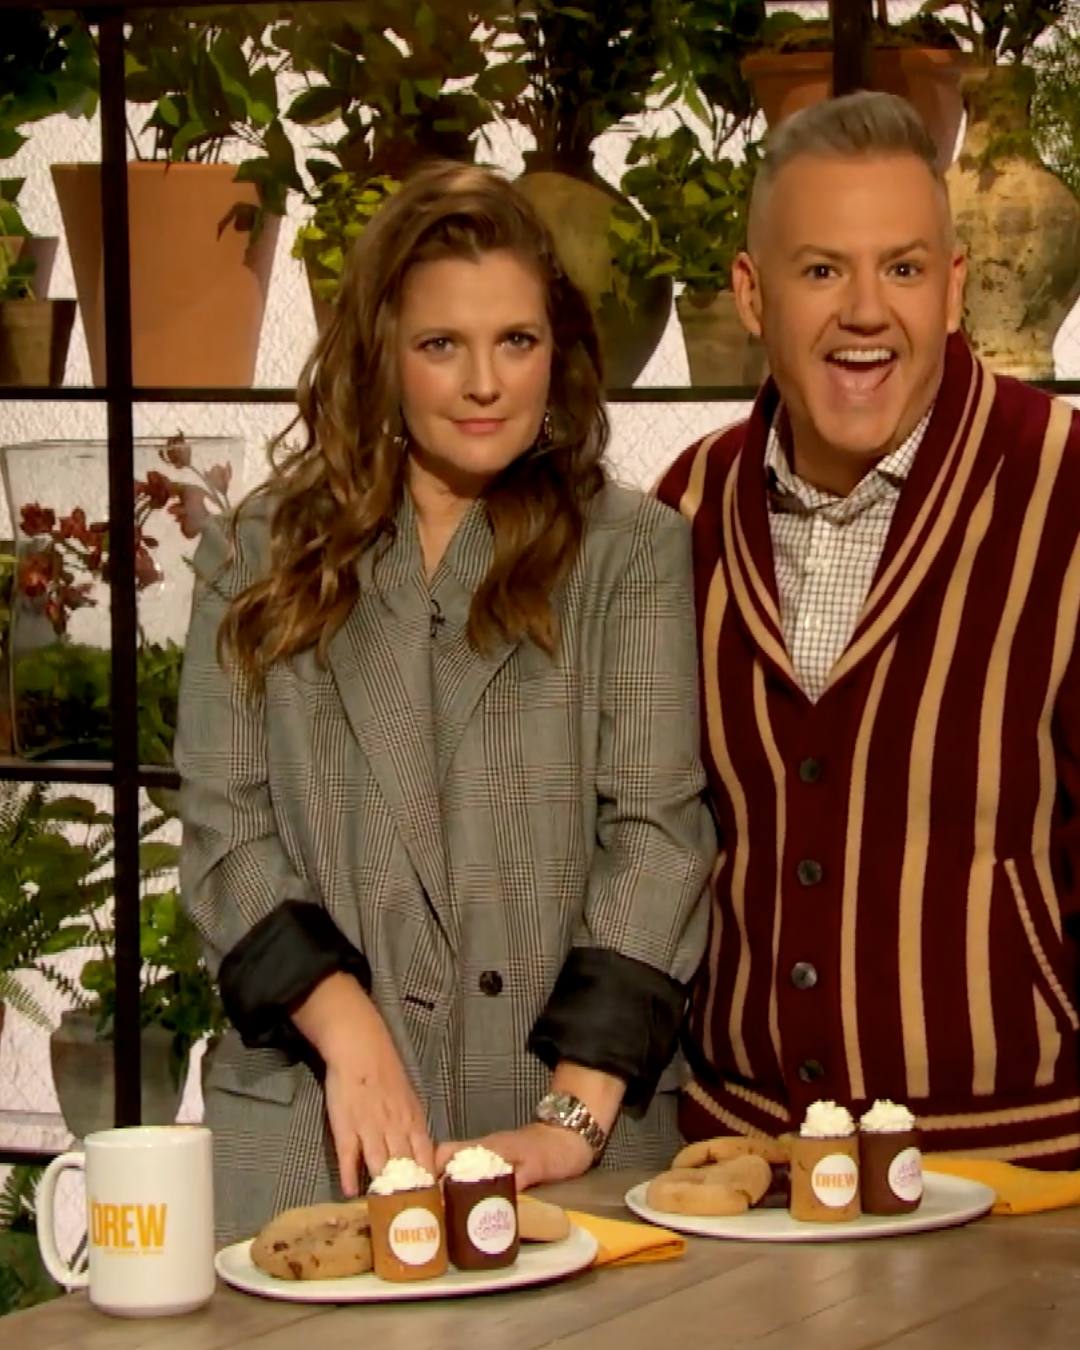 Drew Barrymore's Favorite Cookies Make the Perfect Holiday Gifts